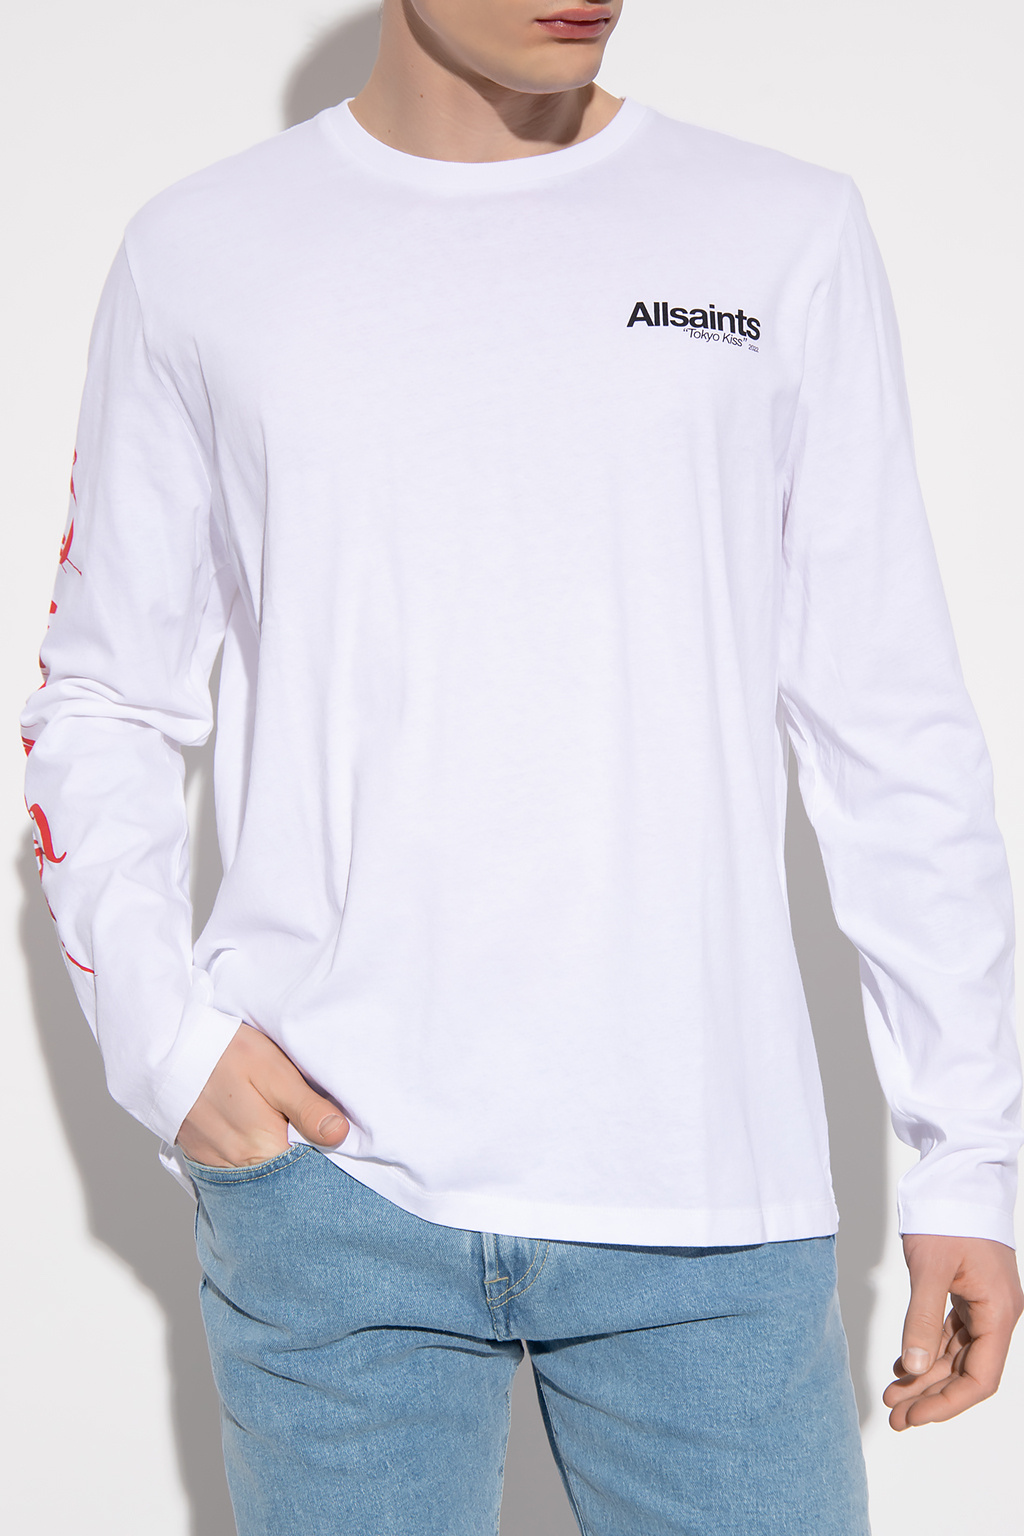 AllSaints ‘Silver’ T-shirt with long sleeves